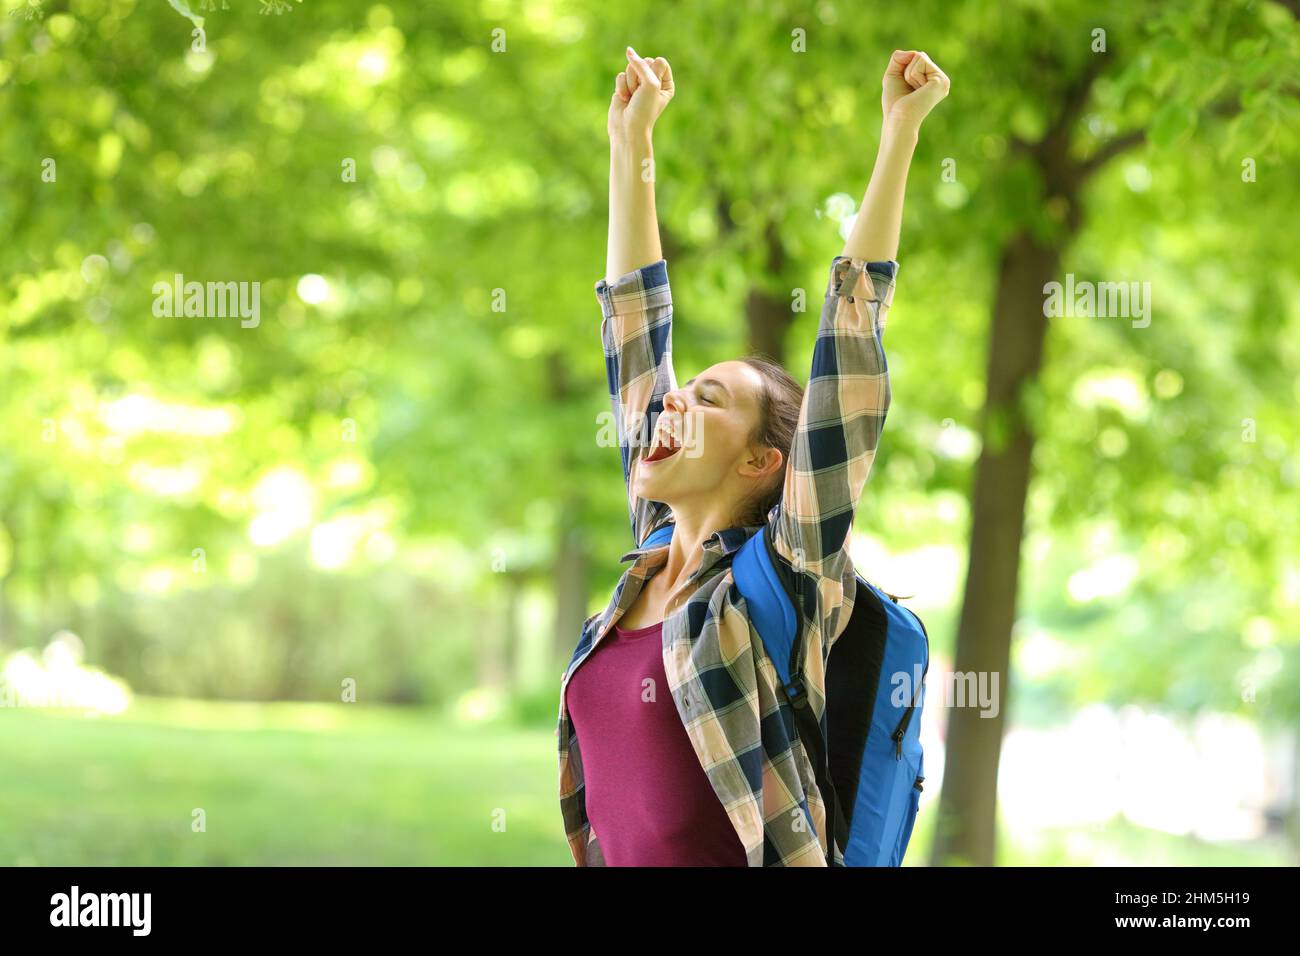 Excited student raising arms celebrating success in a park Stock Photo